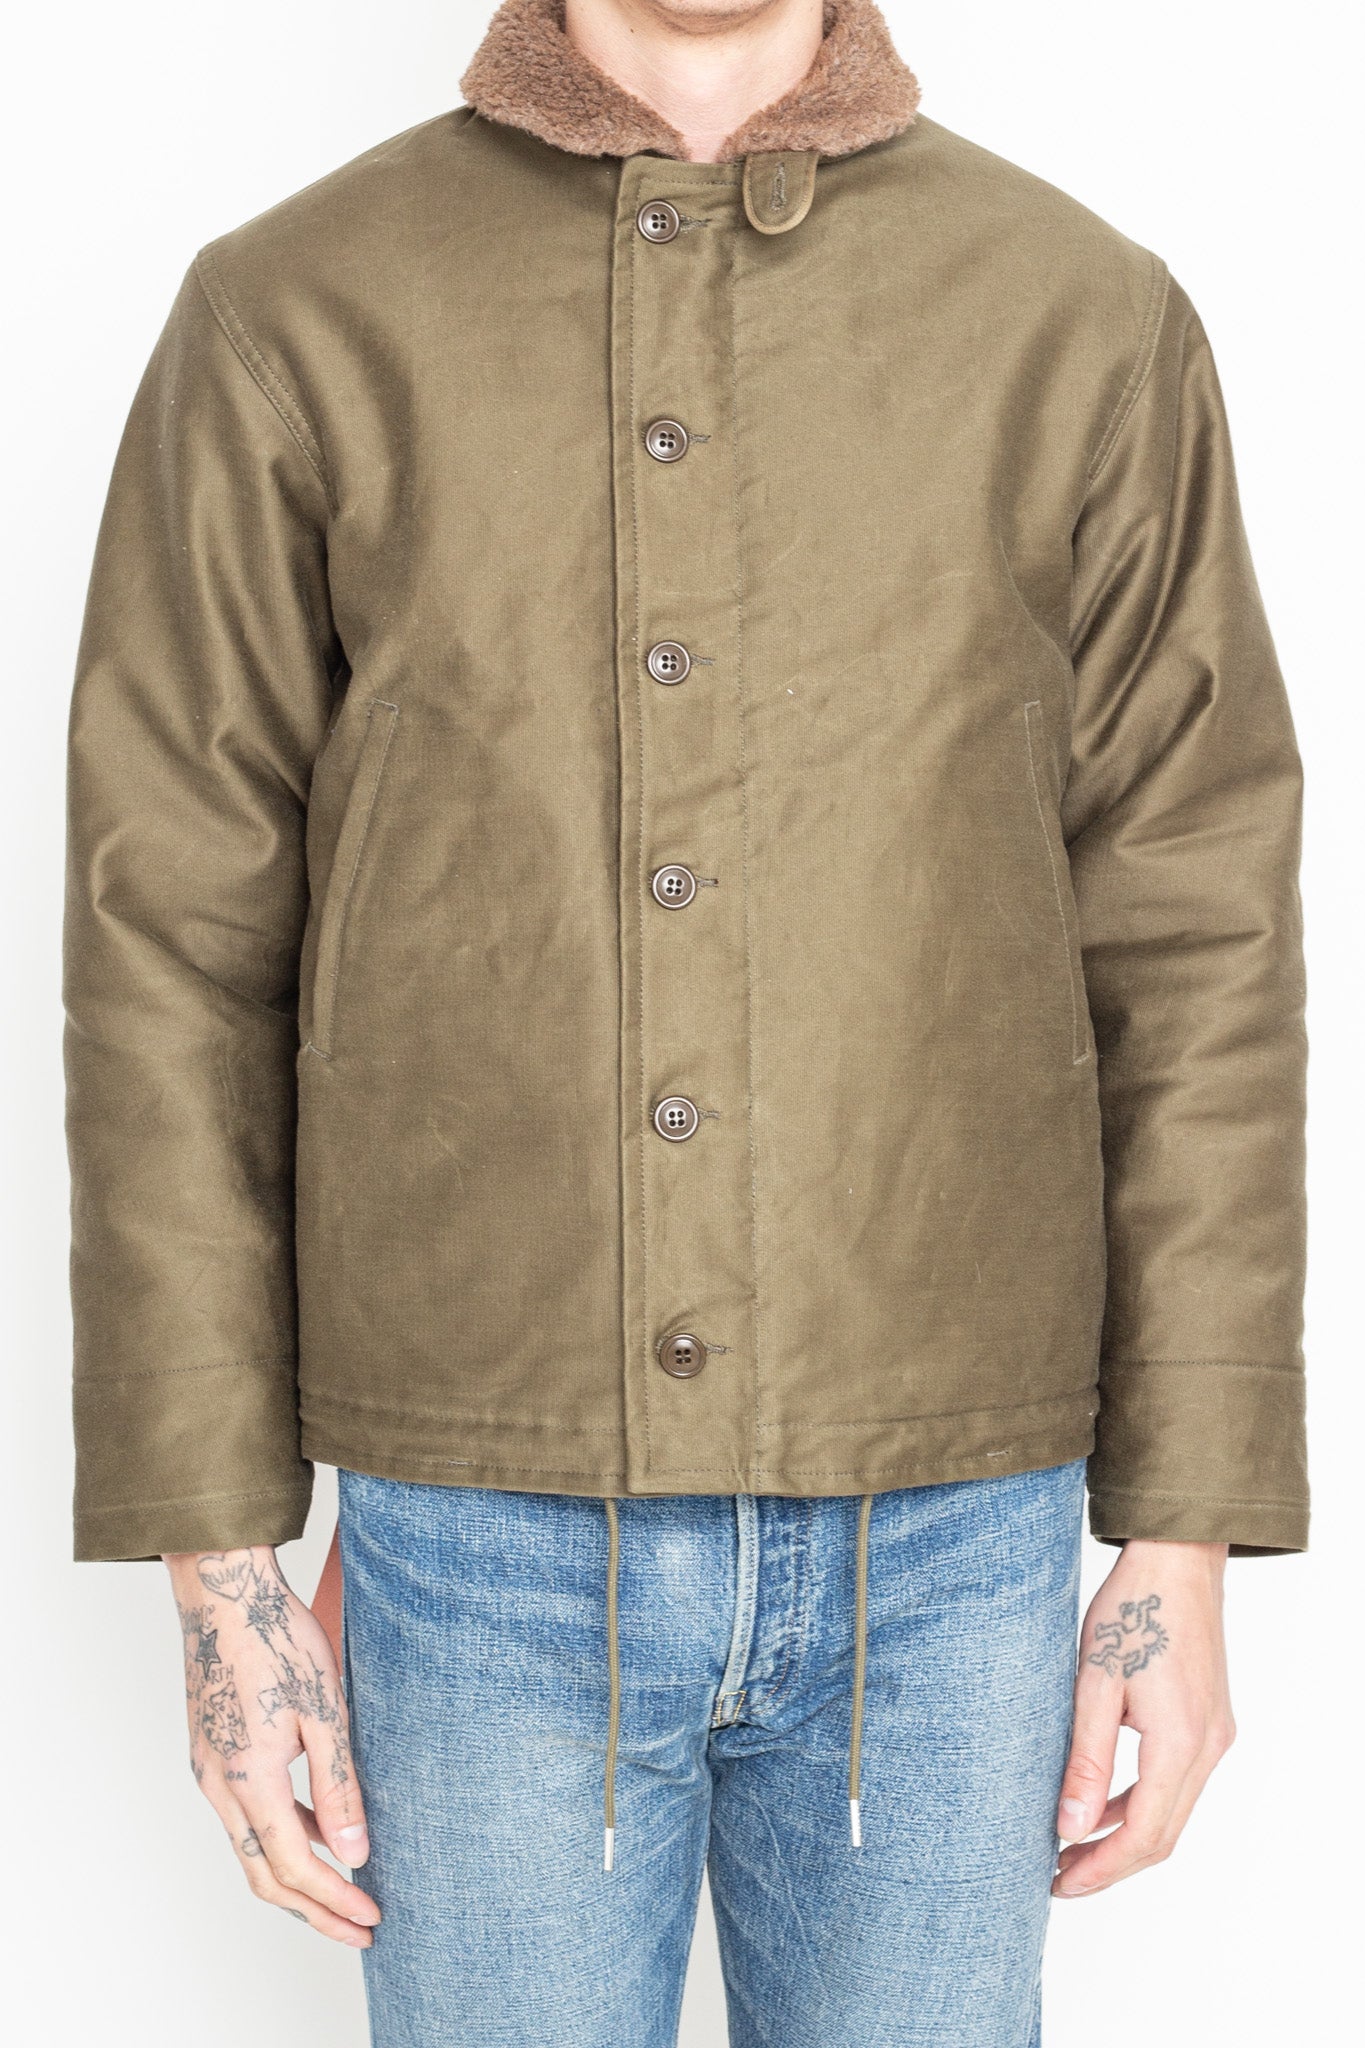 N-1 Deck Jacket in Olive (Exclusive Plain Edition)